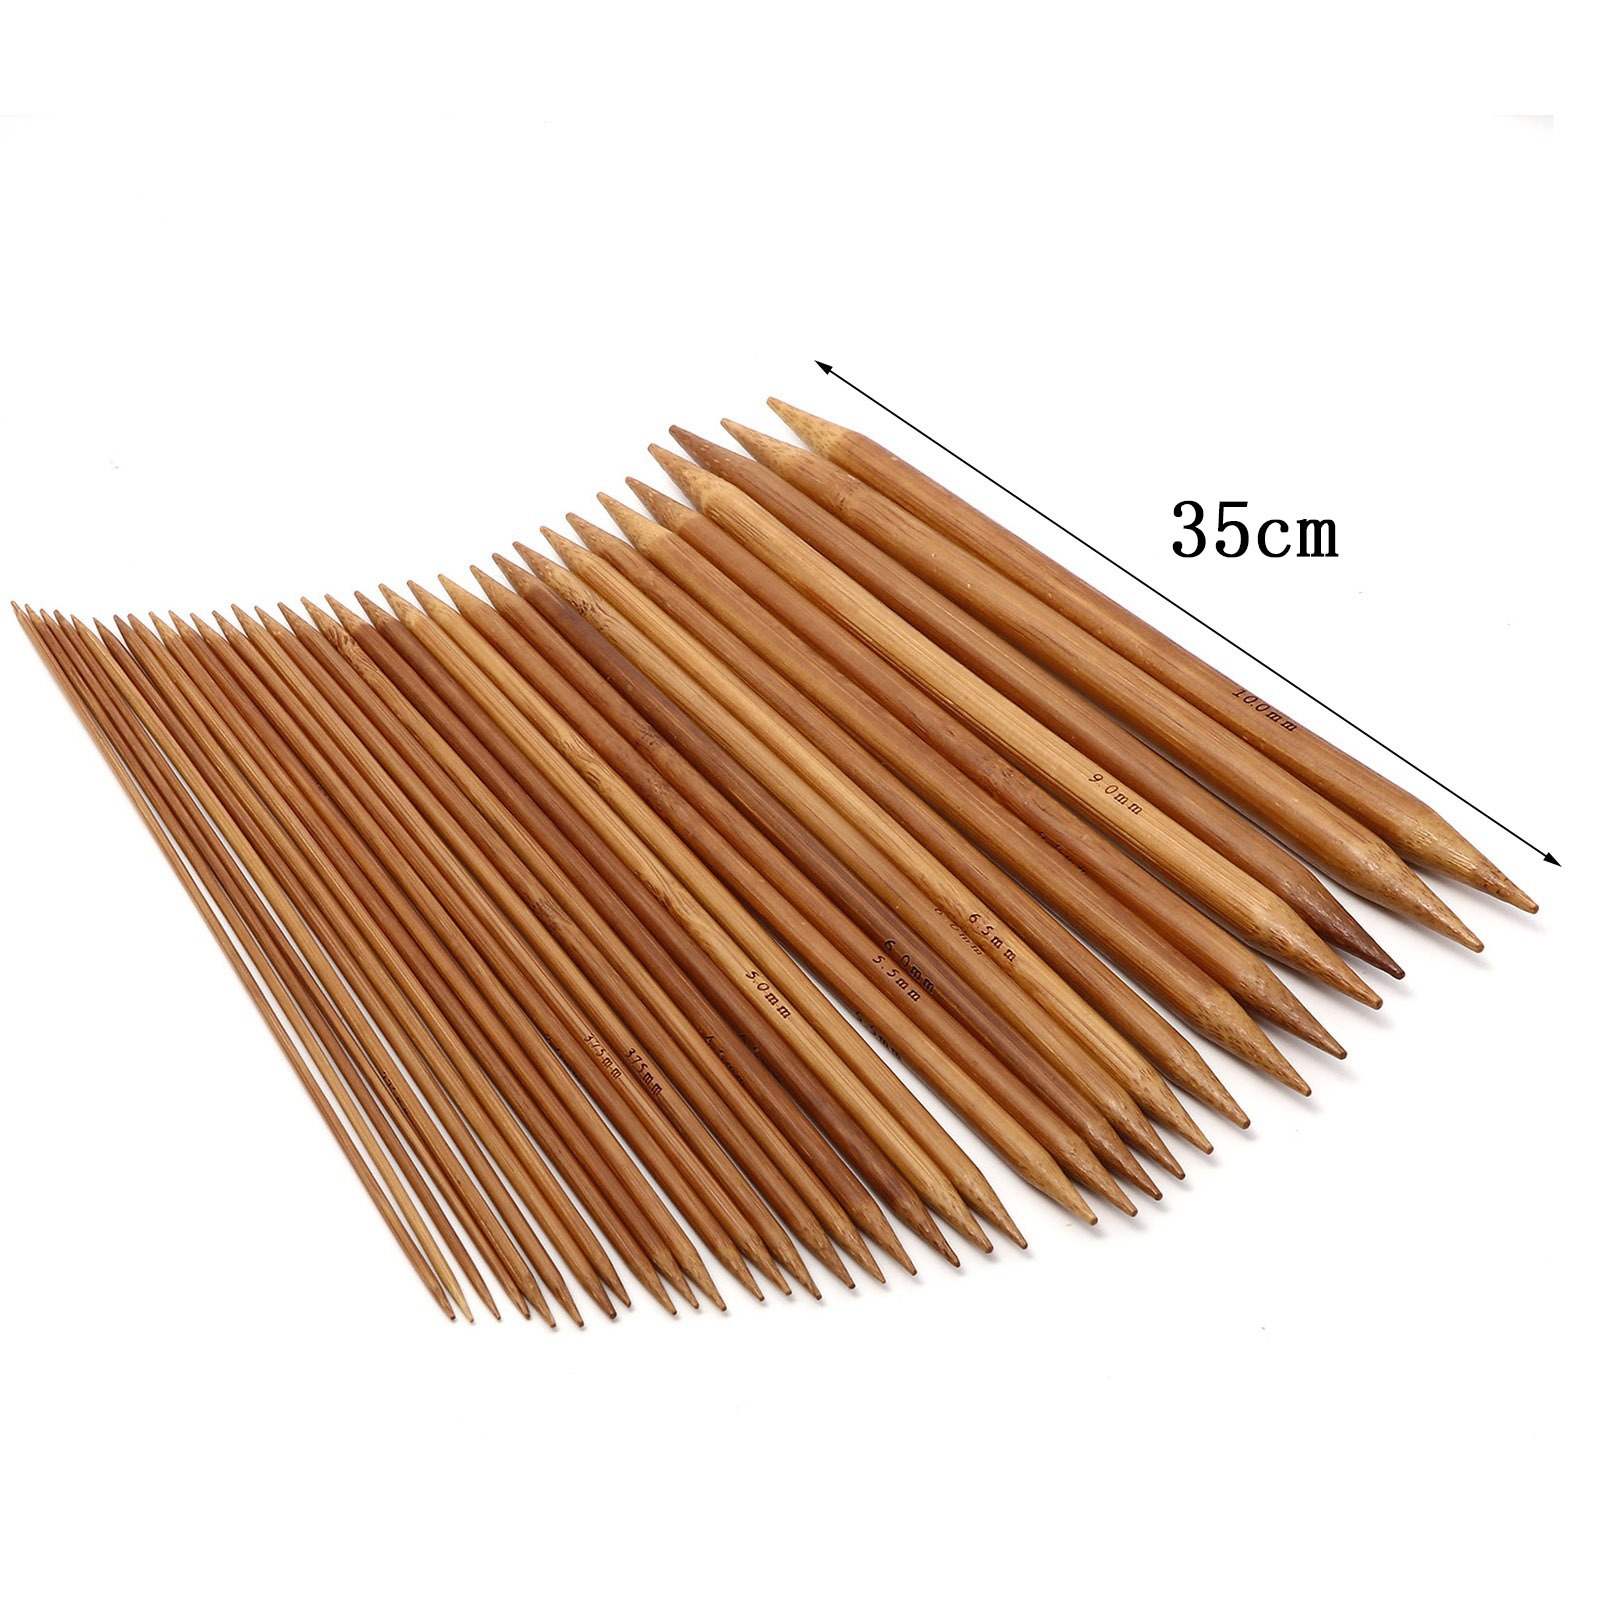 Bild von Bamboo Double Pointed Knitting Needles Brown 35cm(13 6/8") long, 5 PCs